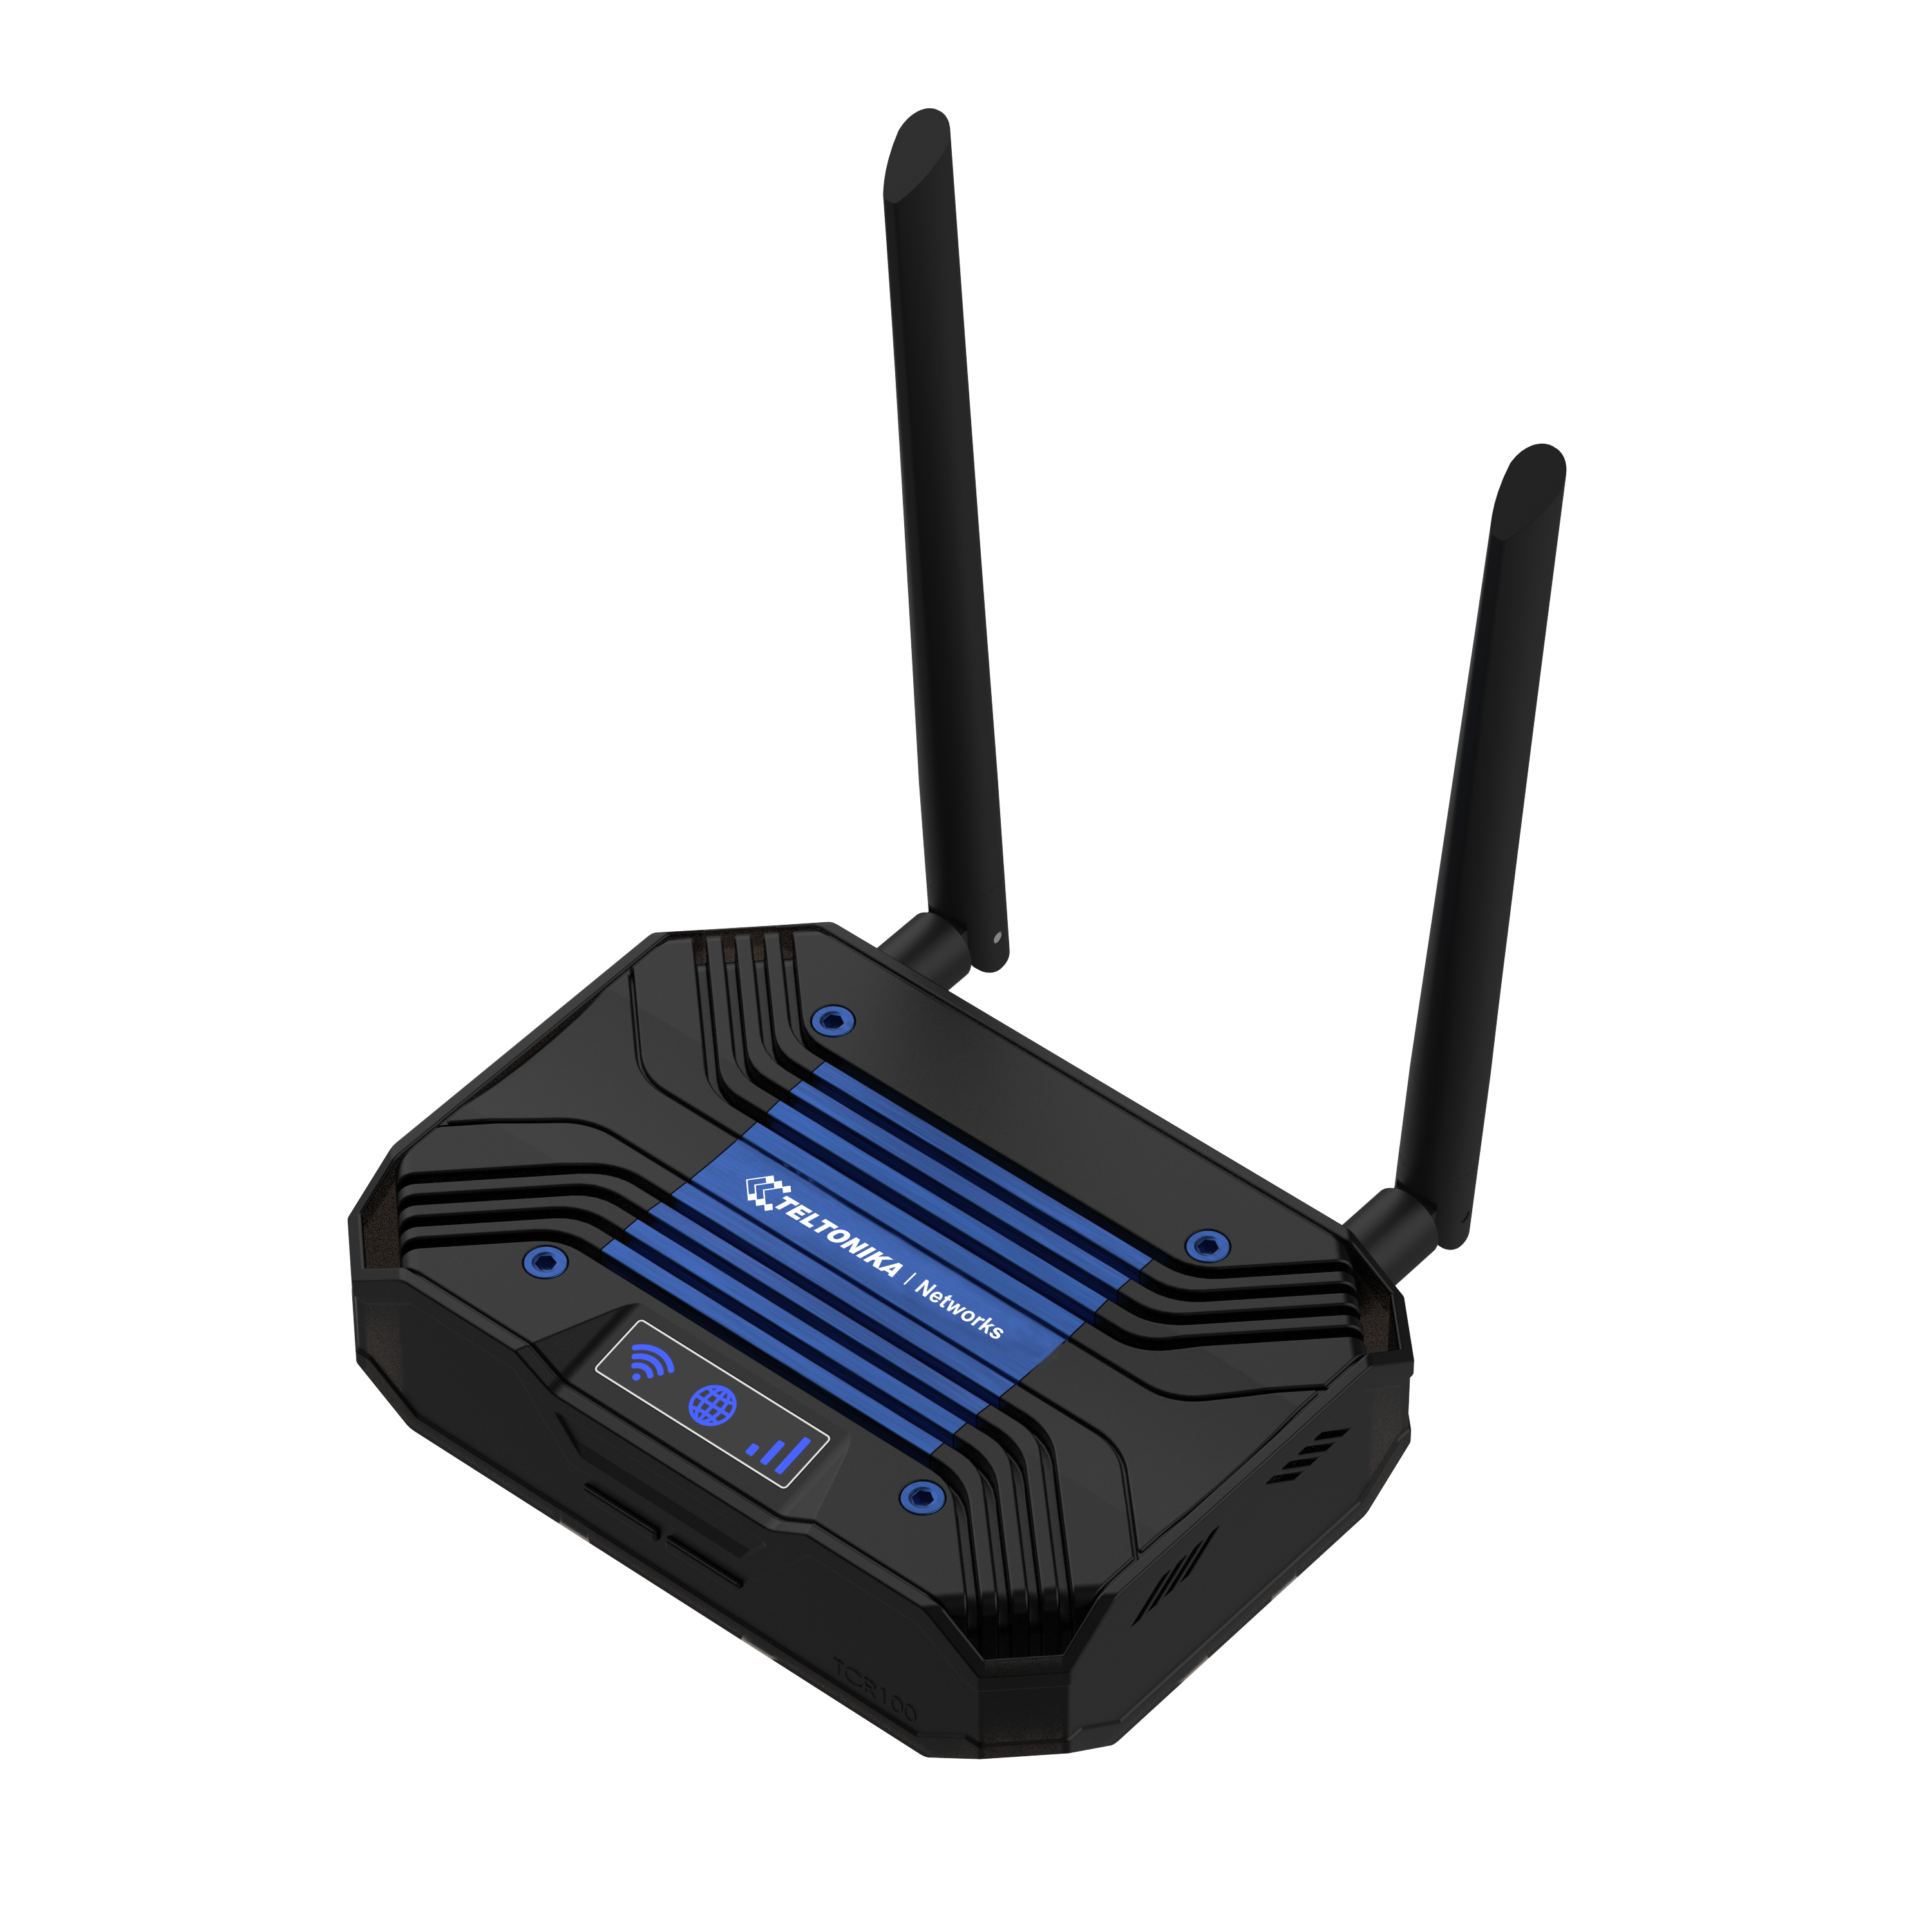 Industrial Cellular Router. 4G/LTE (Cat 6), 3G